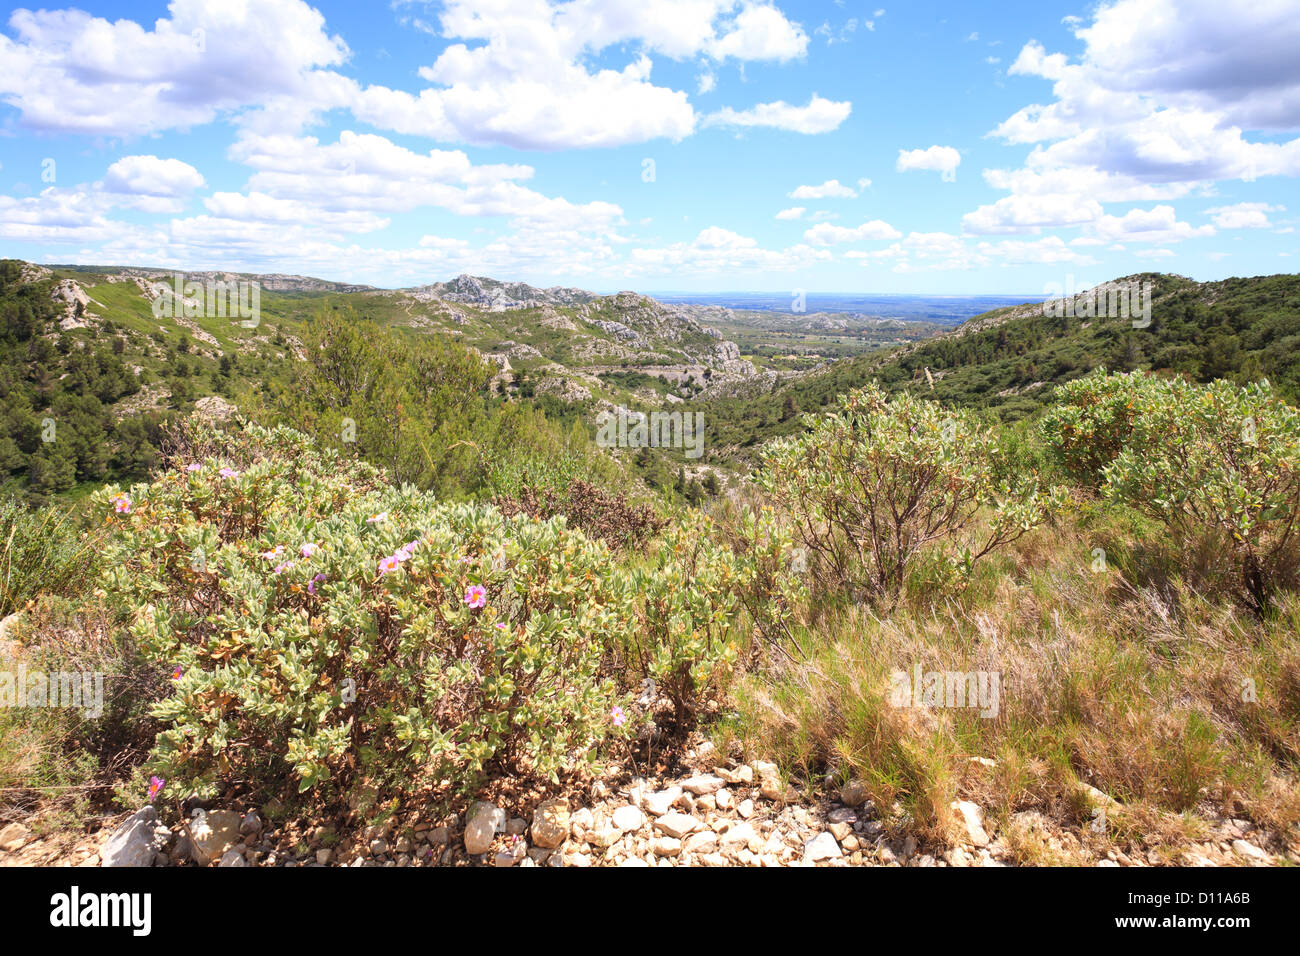 Habitats - Limestone hills with garrigue and flowering Cistus. Looking towards the plain of la Crau. Provence, France. Stock Photo